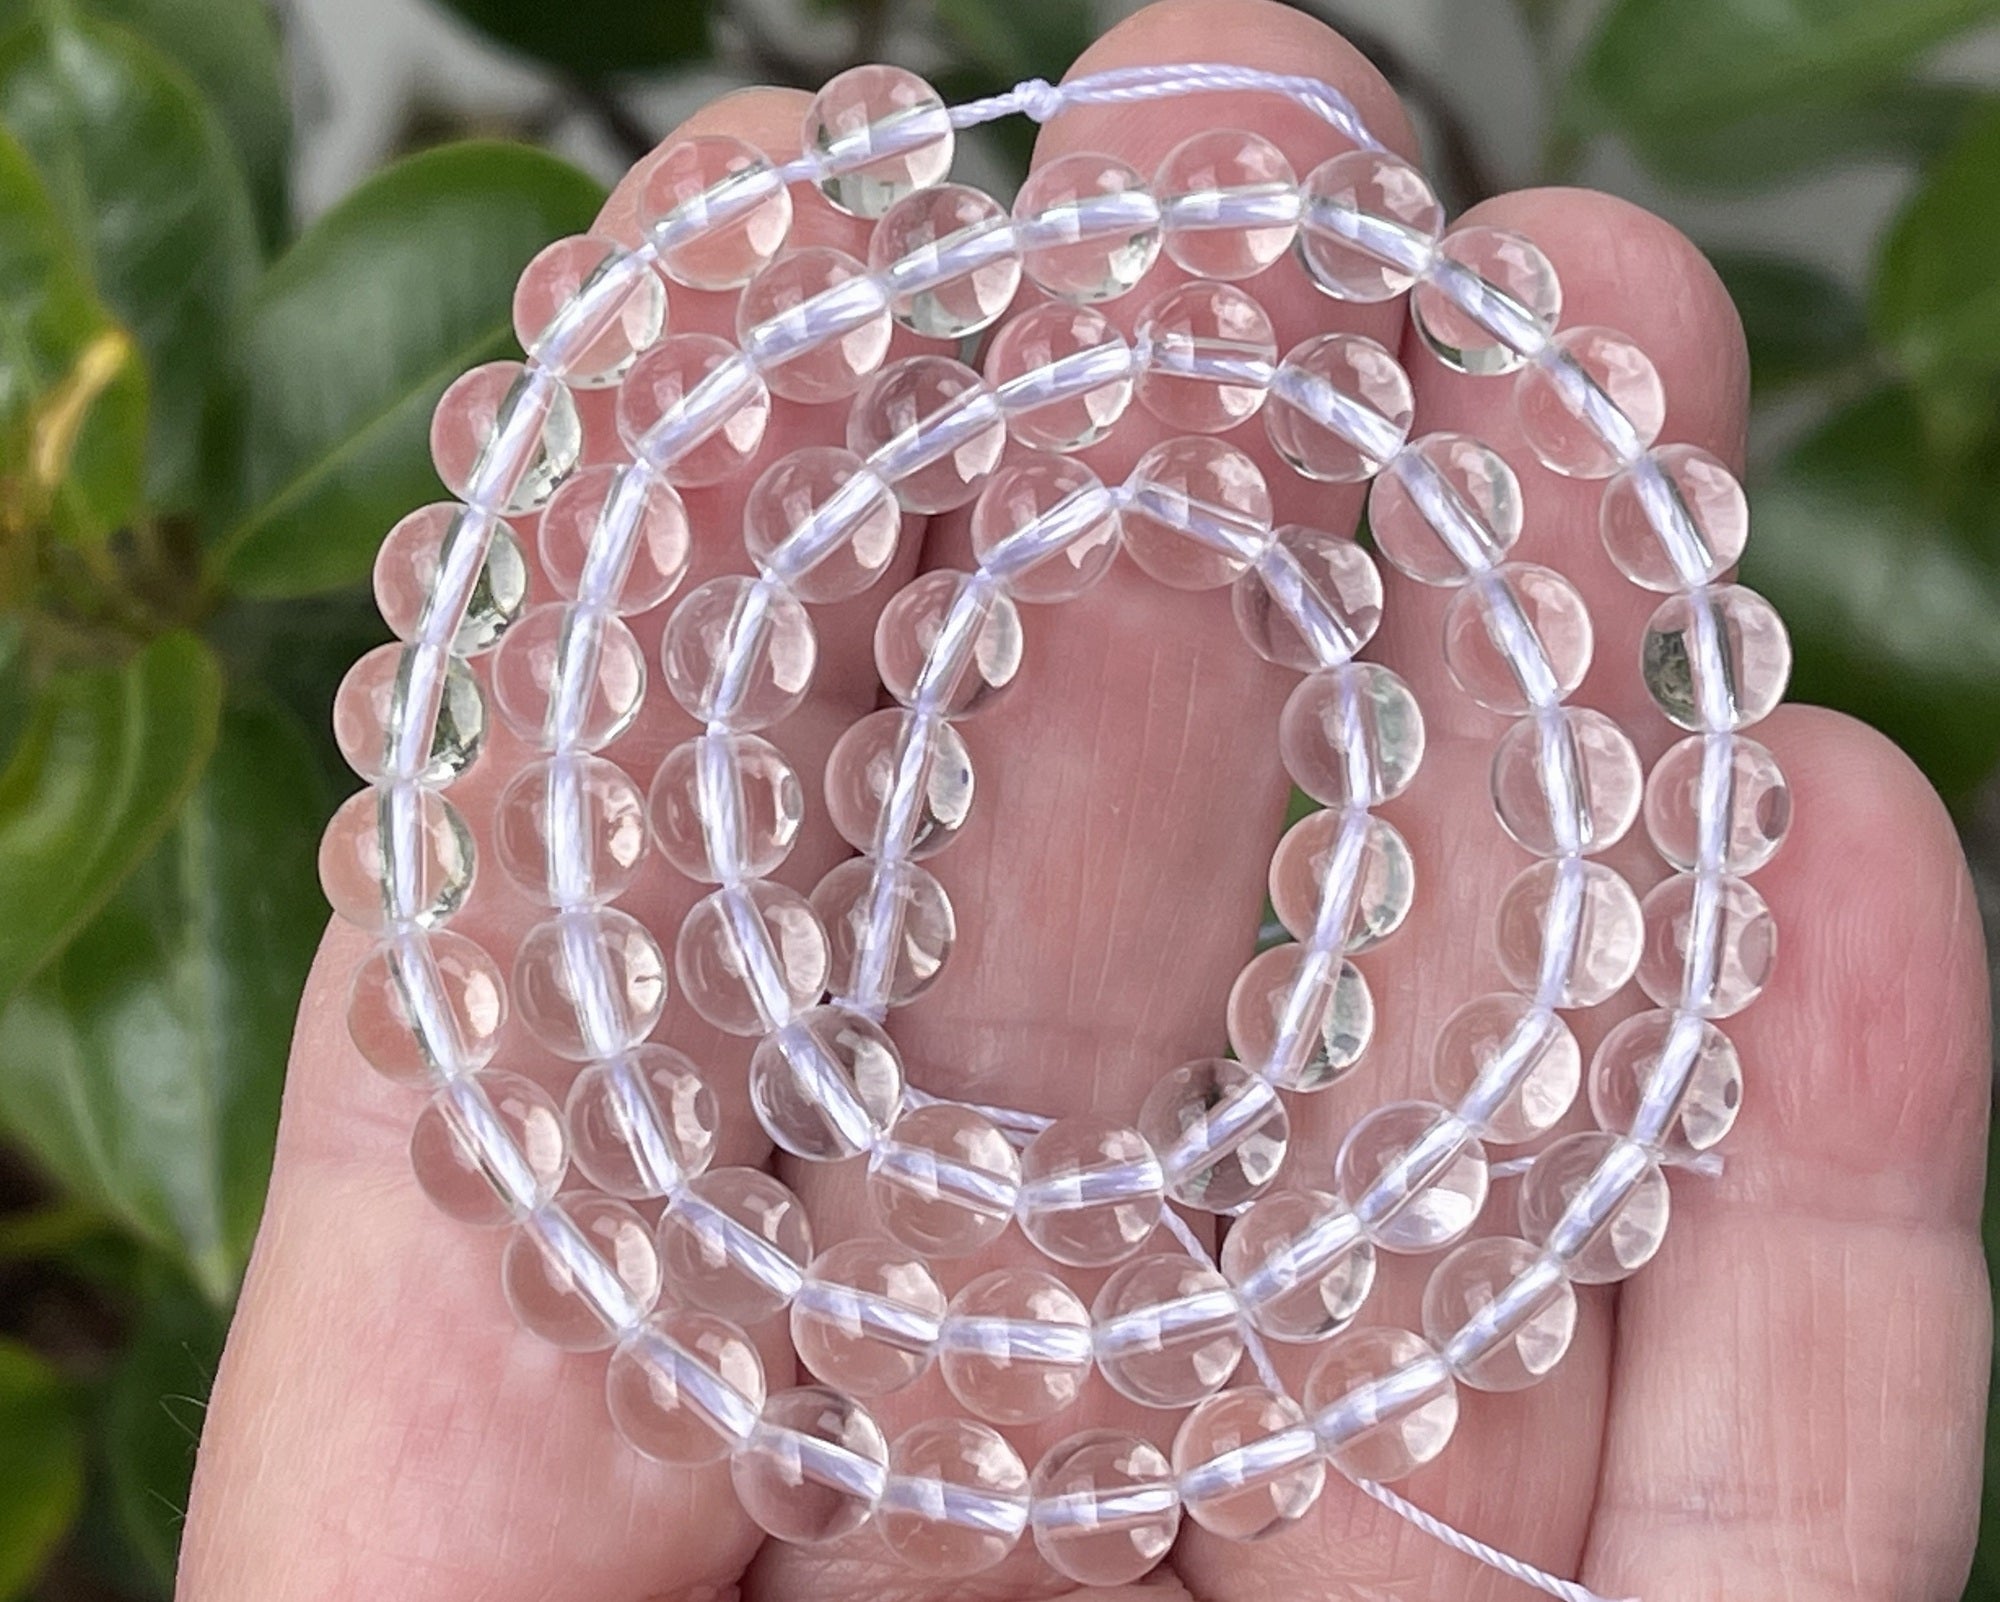 Clear Quartz 6mm round natural rock crystal beads 15.5" strand - Oz Beads 